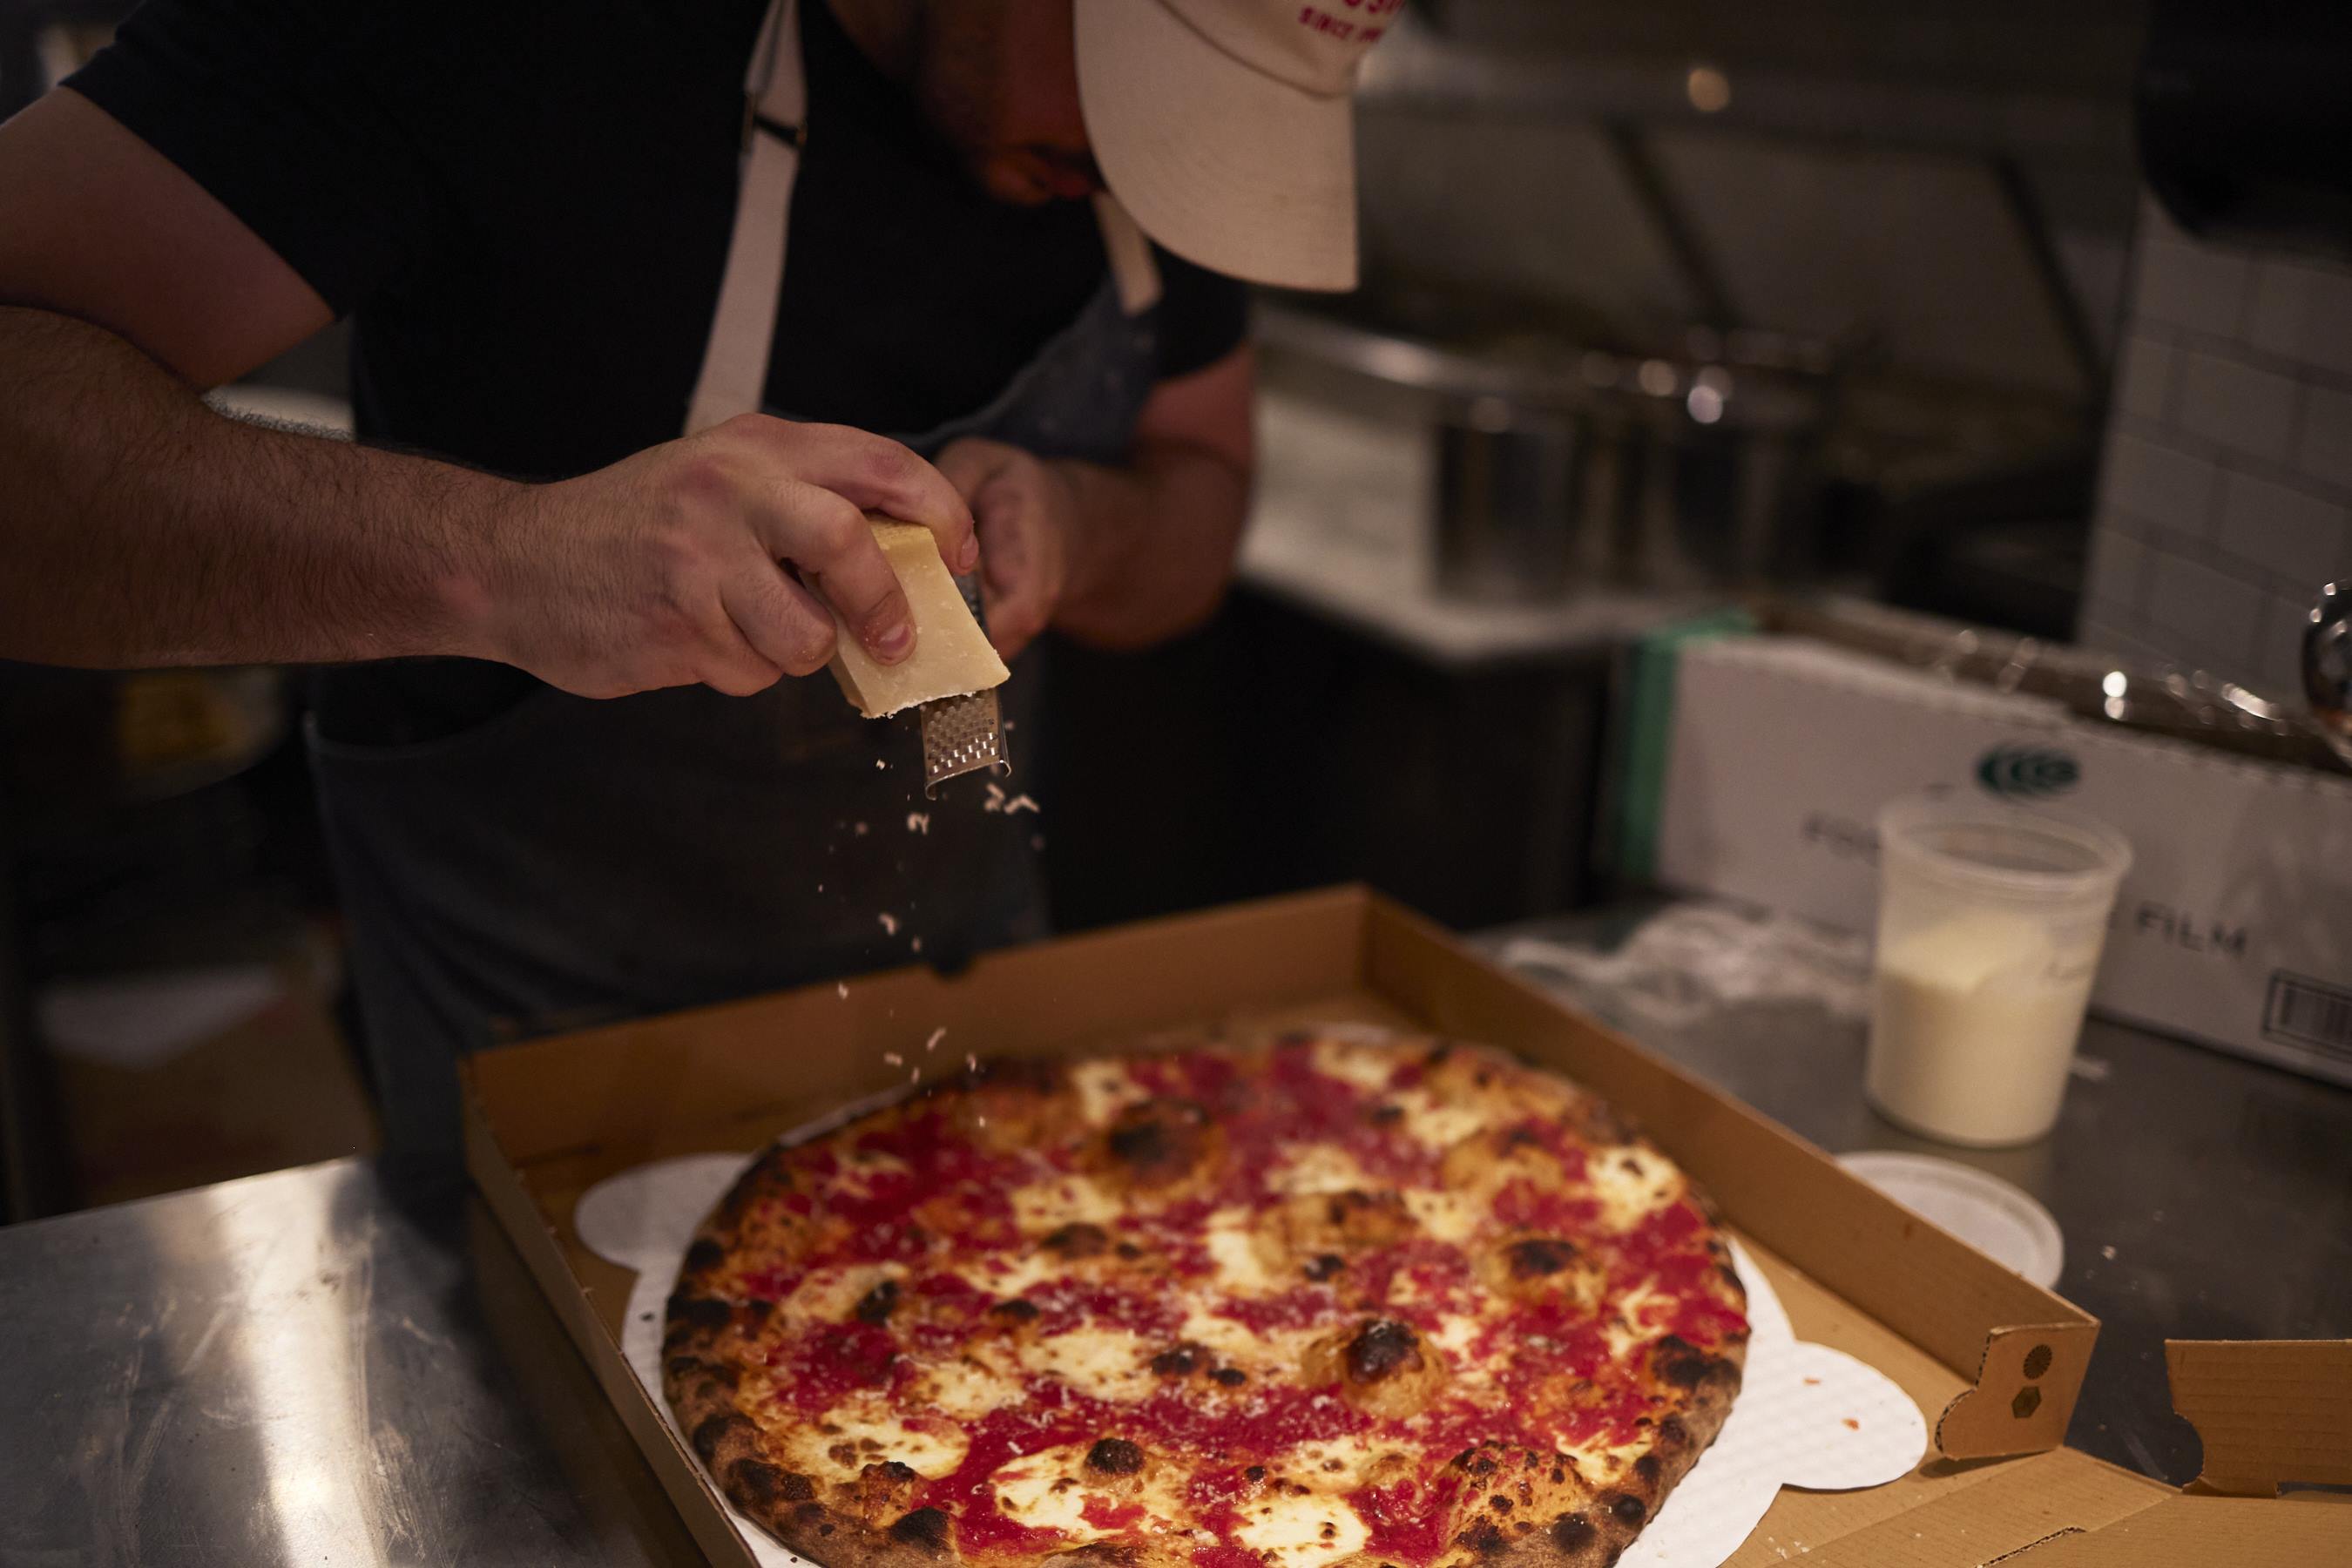 The Ultimate Guide To Finding The Best Pizza In NYC